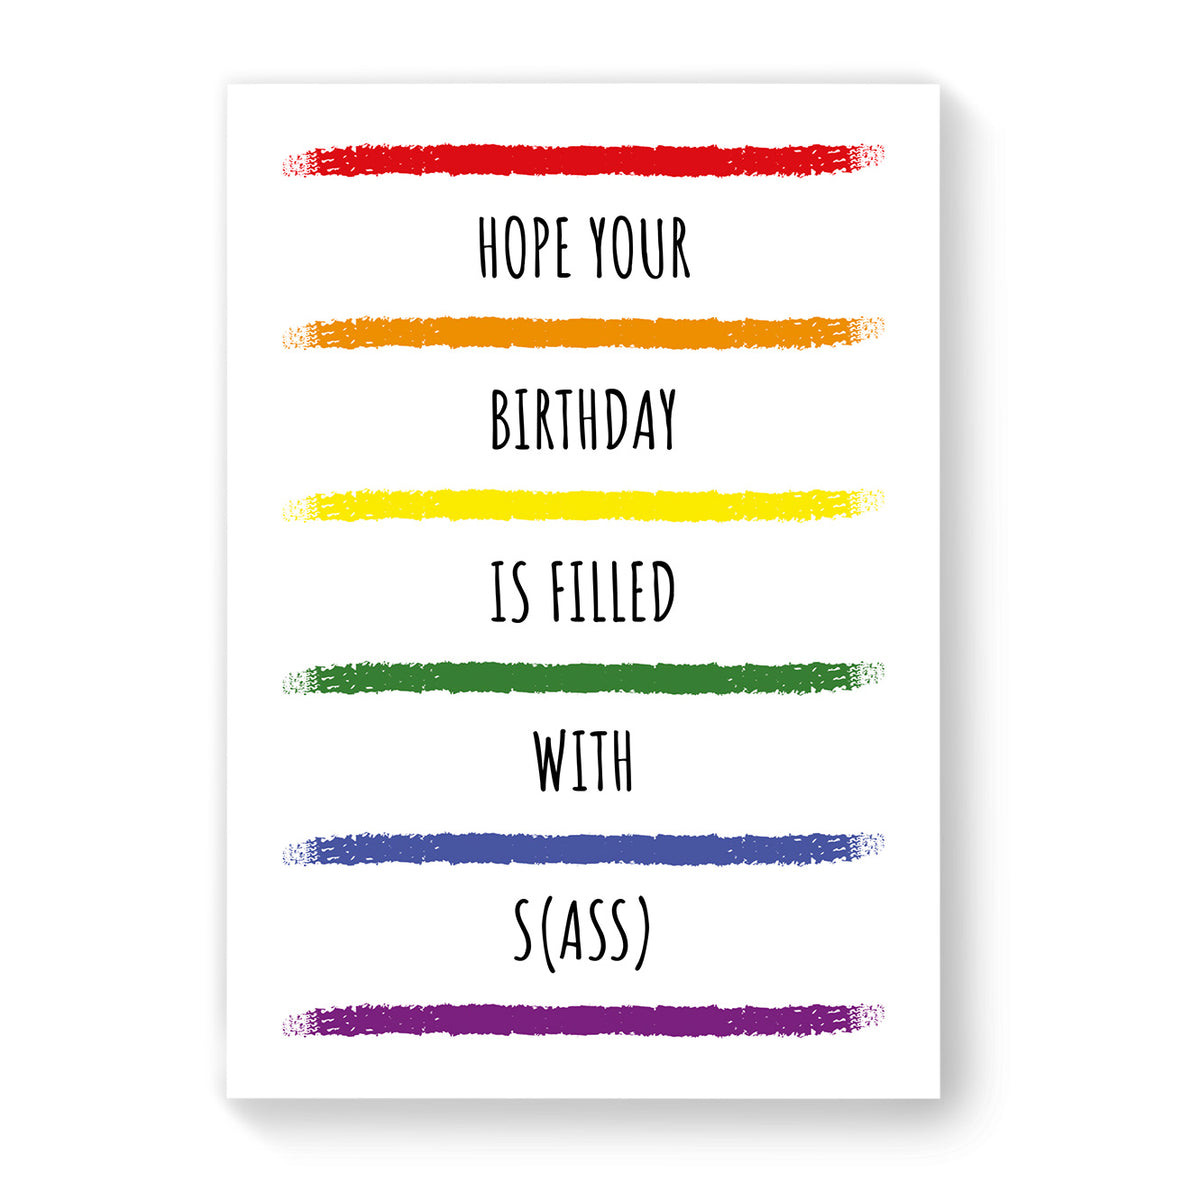 Hope your Birthday is Filled with Sass - Lesbian Gay Birthday Card - White Rainbow Stripes | Gift